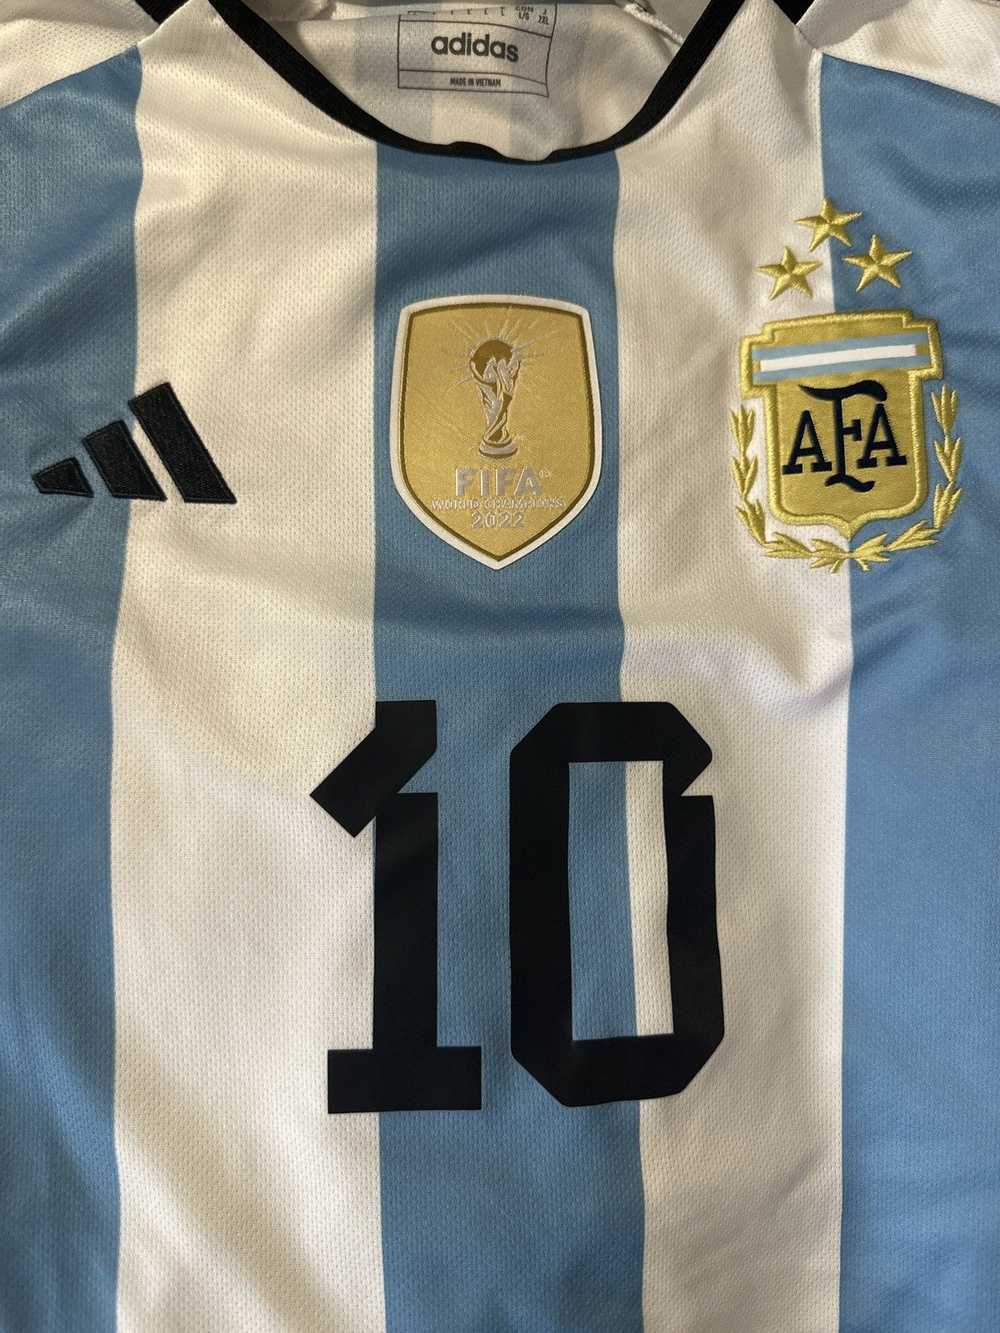 Adidas Argentina Messi 3x World Cup Jersey - image 3